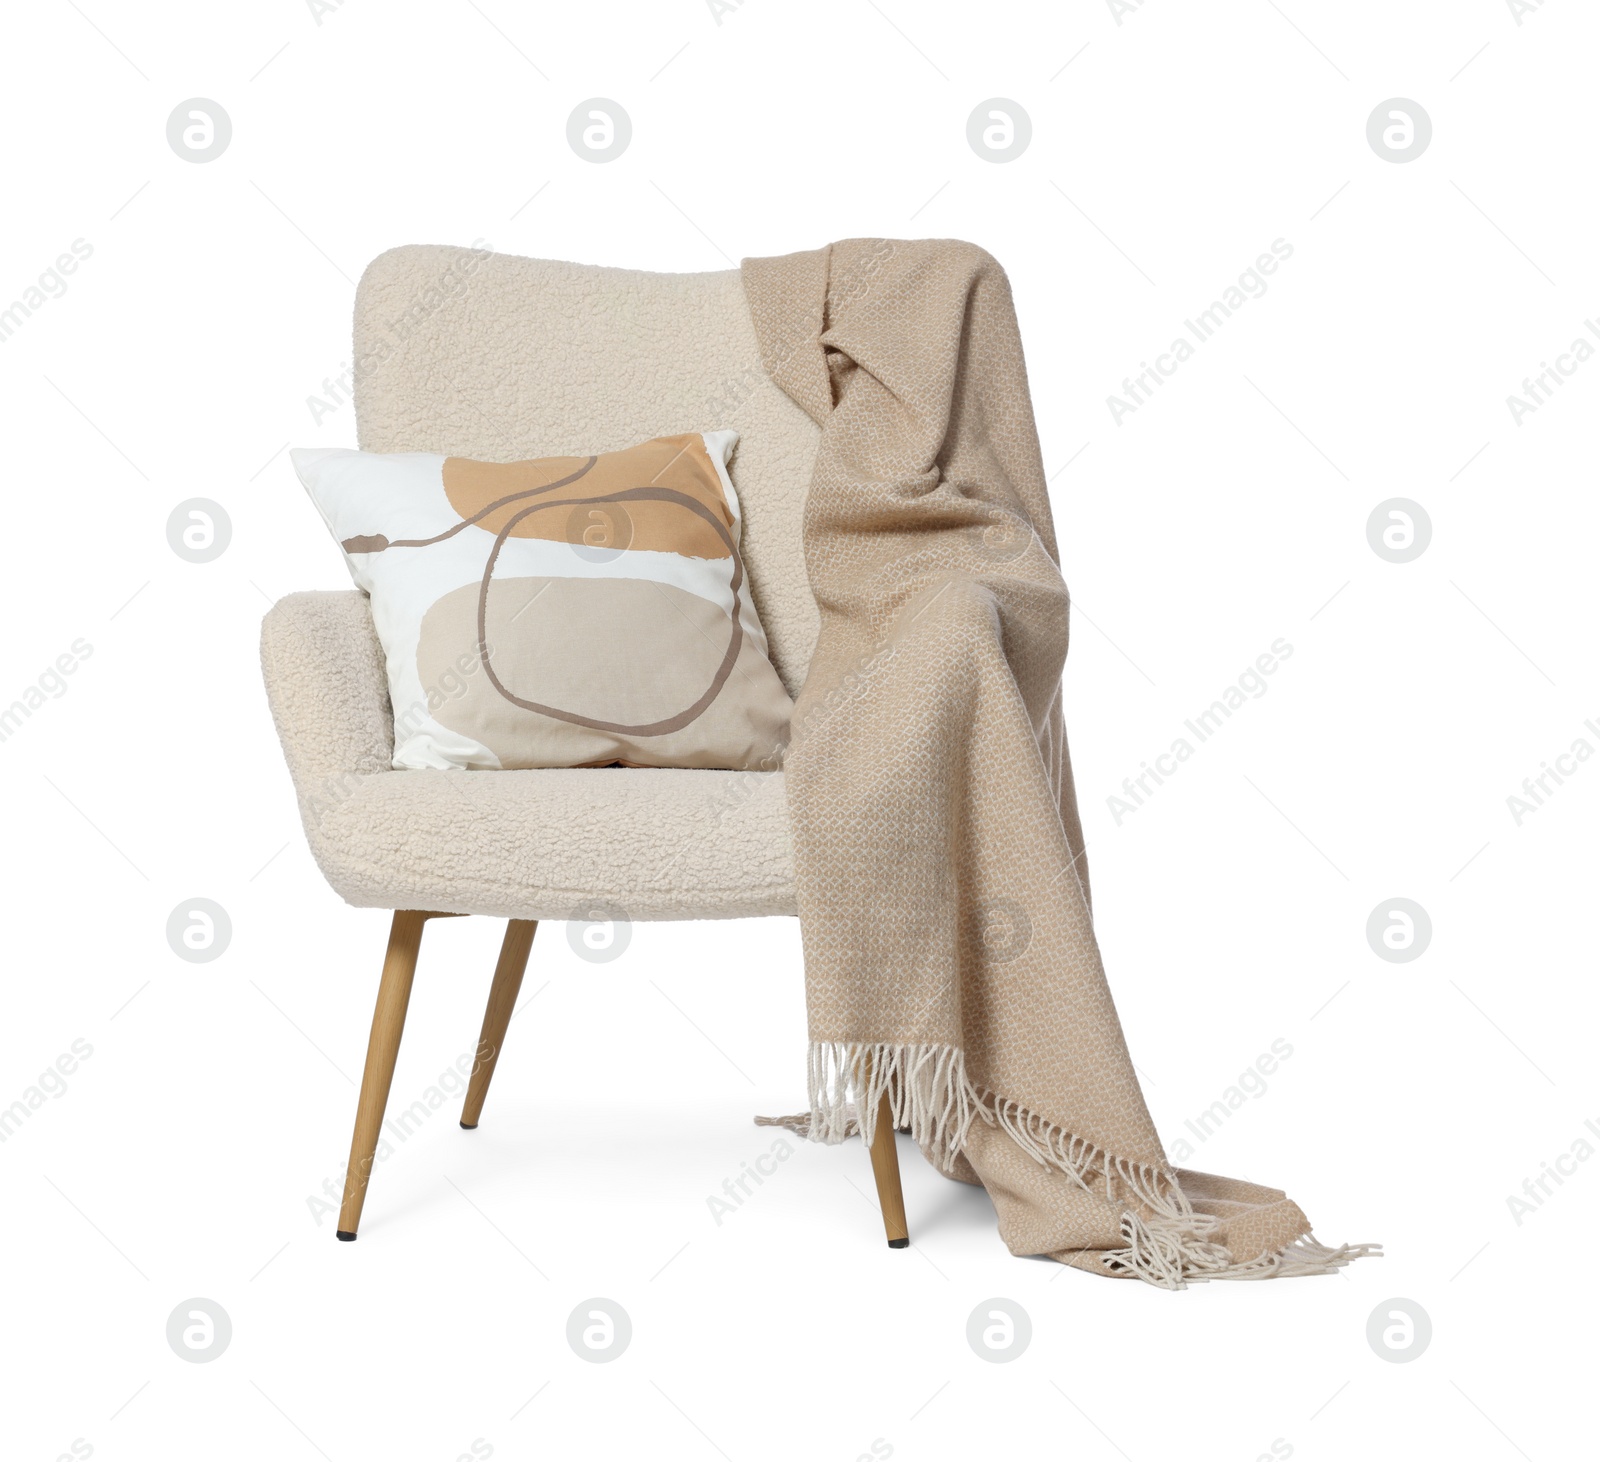 Photo of One stylish comfortable armchair with blanket and pillow isolated on white